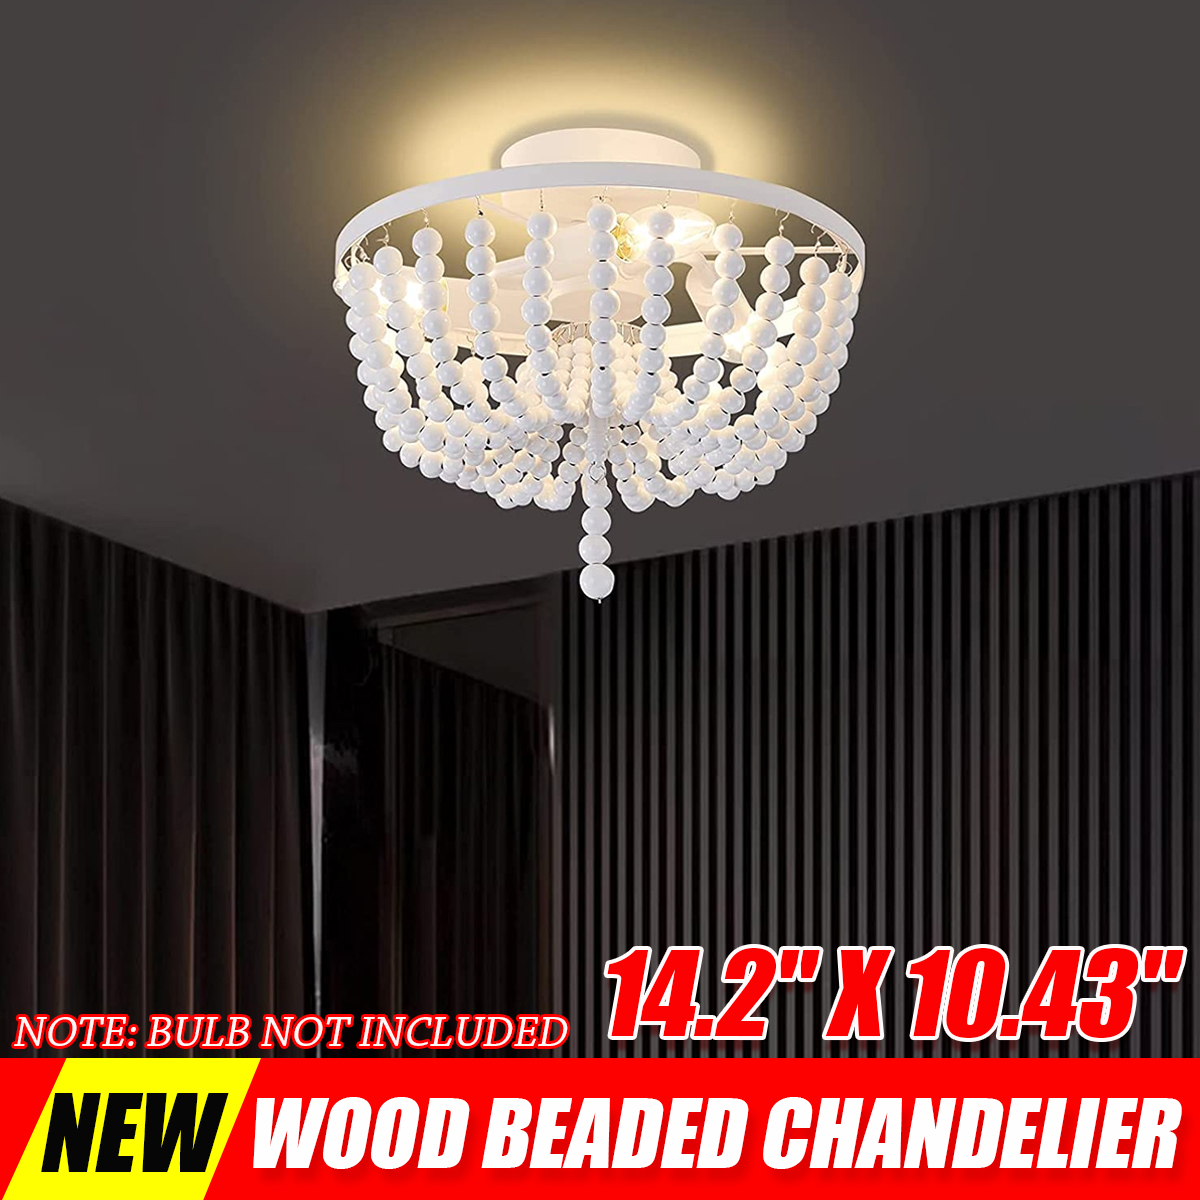 Wooden-Bead-Chandelier-Lighting-Fixture-Retro-Wood-Ceiling-Pendant-Light-White-Without-Bulbs-1935242-1